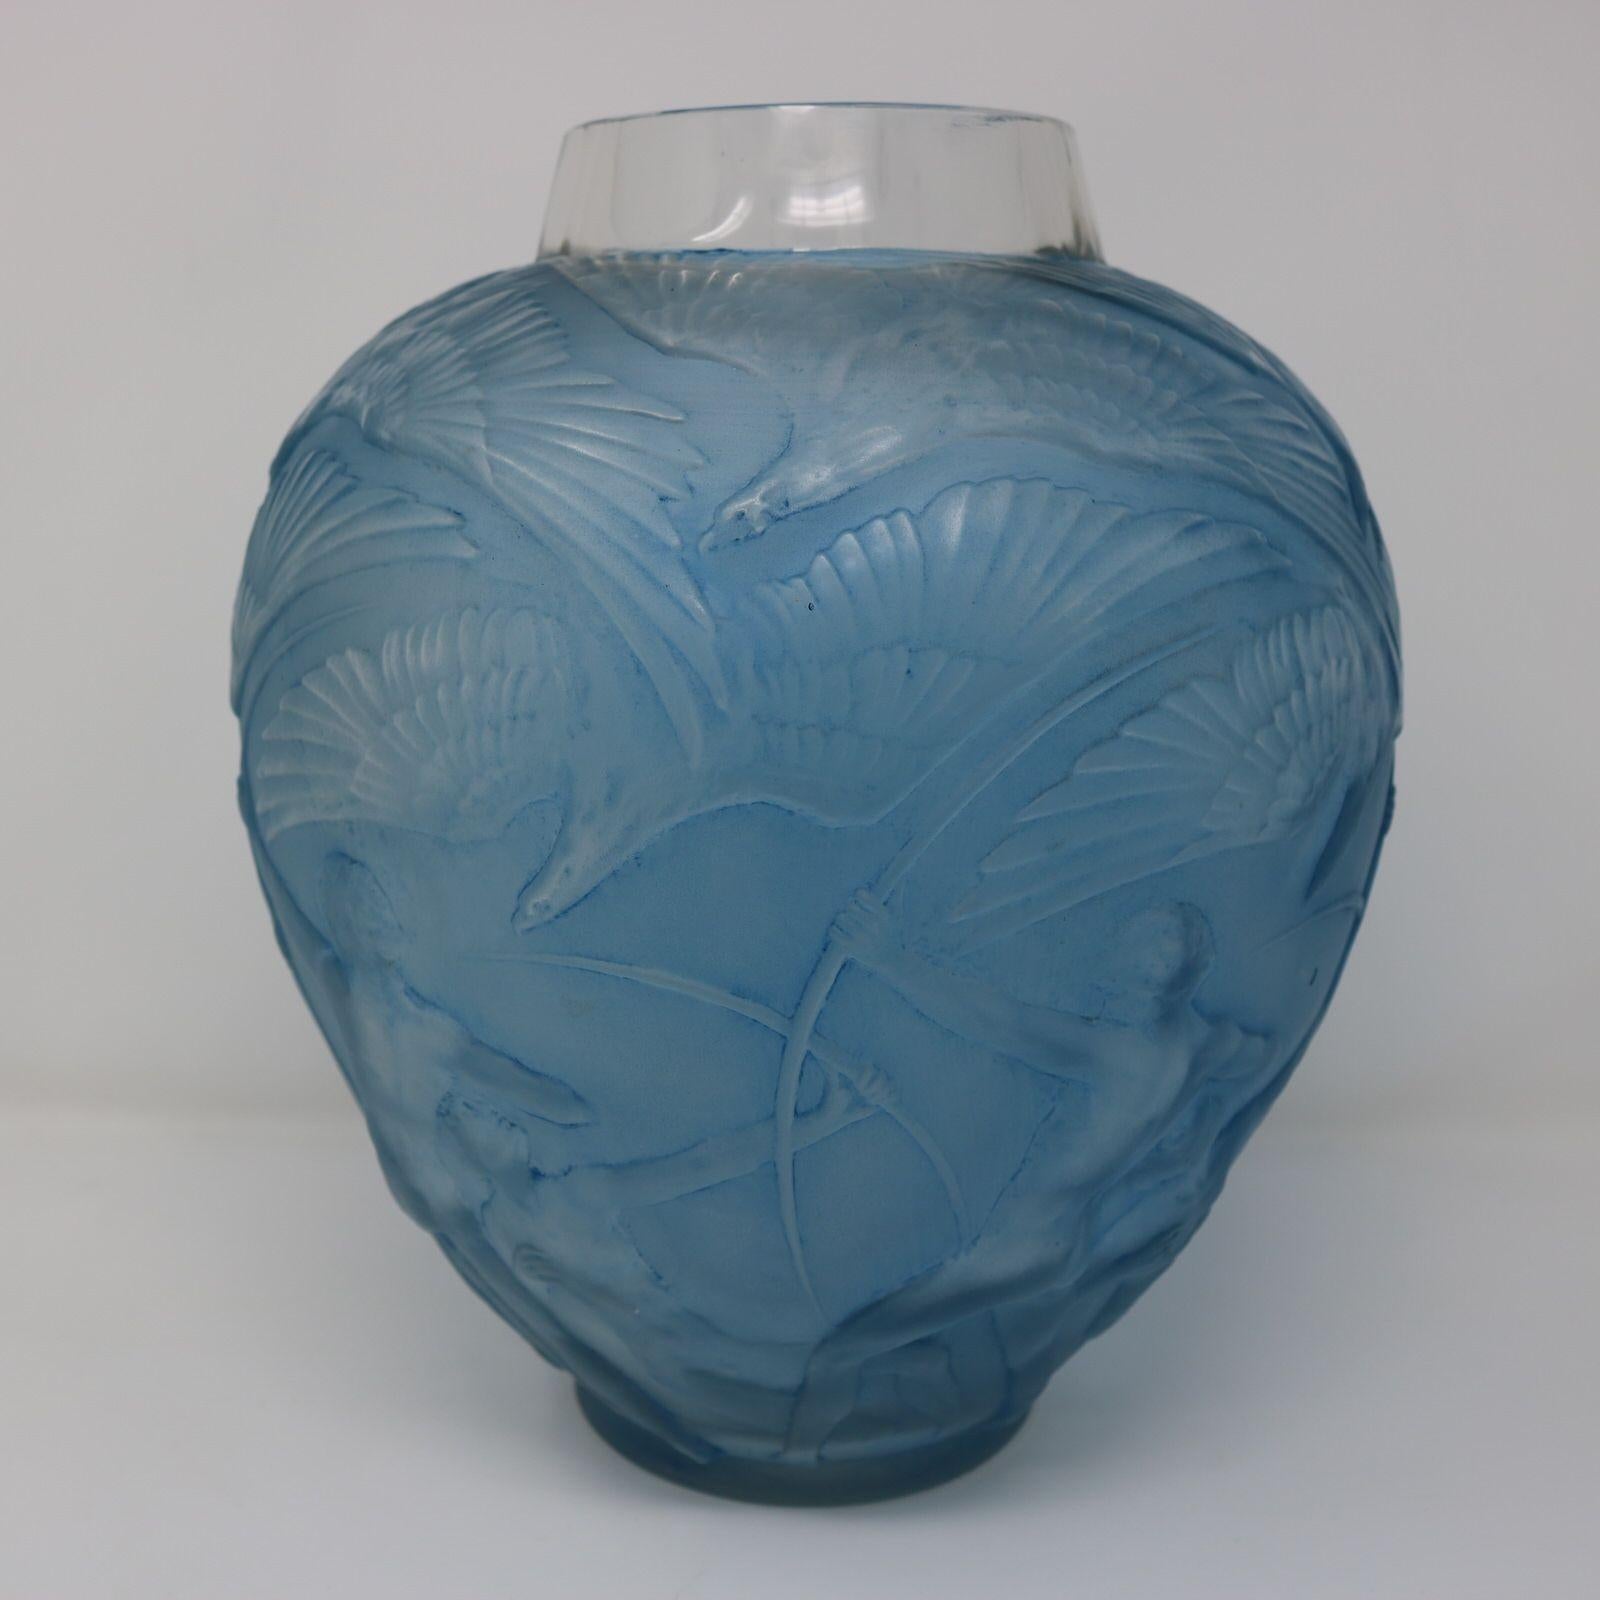 Rene Lalique Clear & Frosted Glass 'Archers' Vase, with blue staining to the details. This pattern features archers poised to shoot arrows around the bottom half. Eagles in flight around the upper half. Wheel cut makers mark, 'R. LALIQUE' and